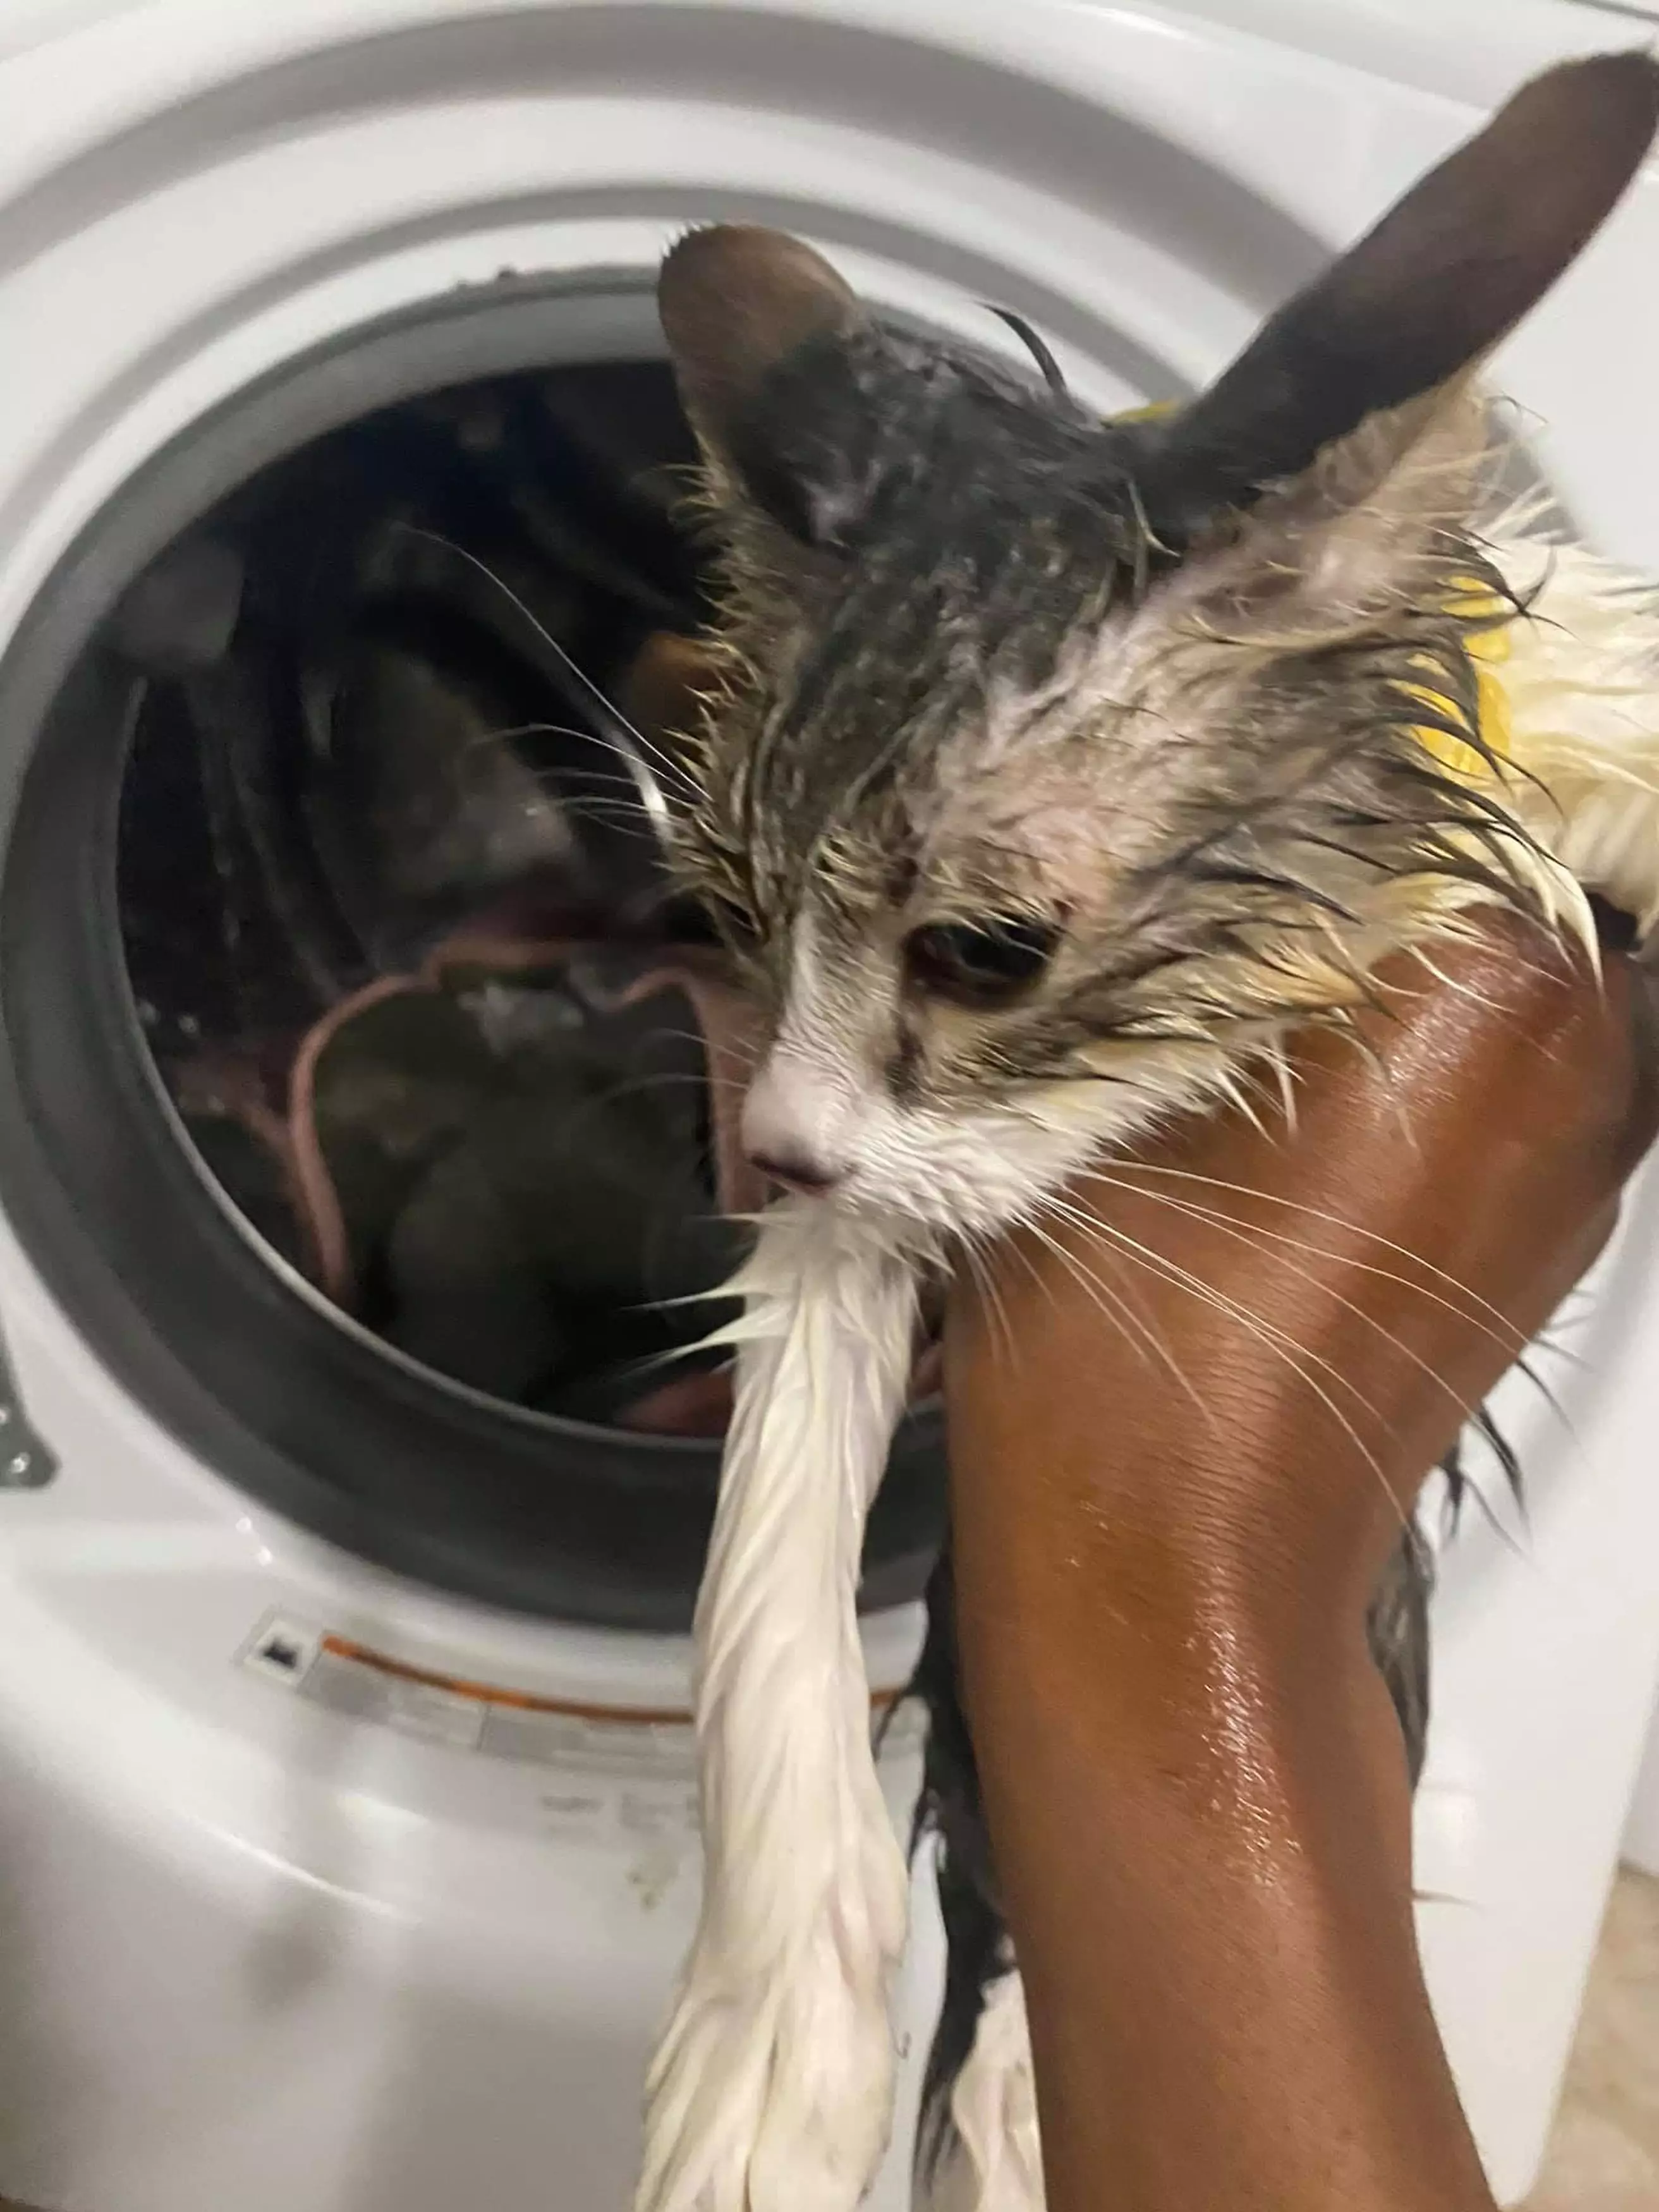 The poor cat had been soaked (